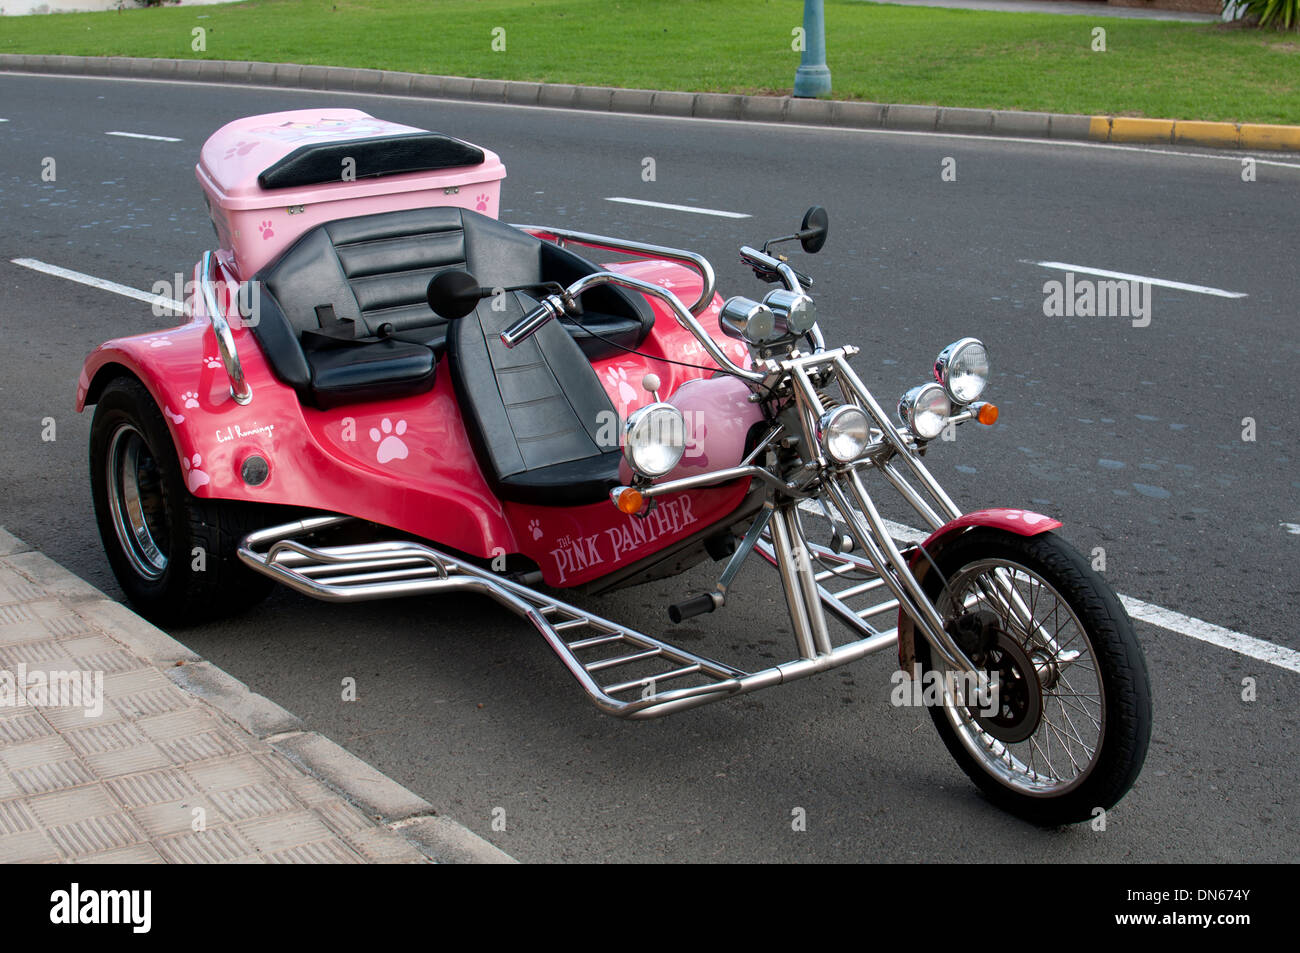 Motor Tricycle High Resolution Stock Photography and Images - Alamy